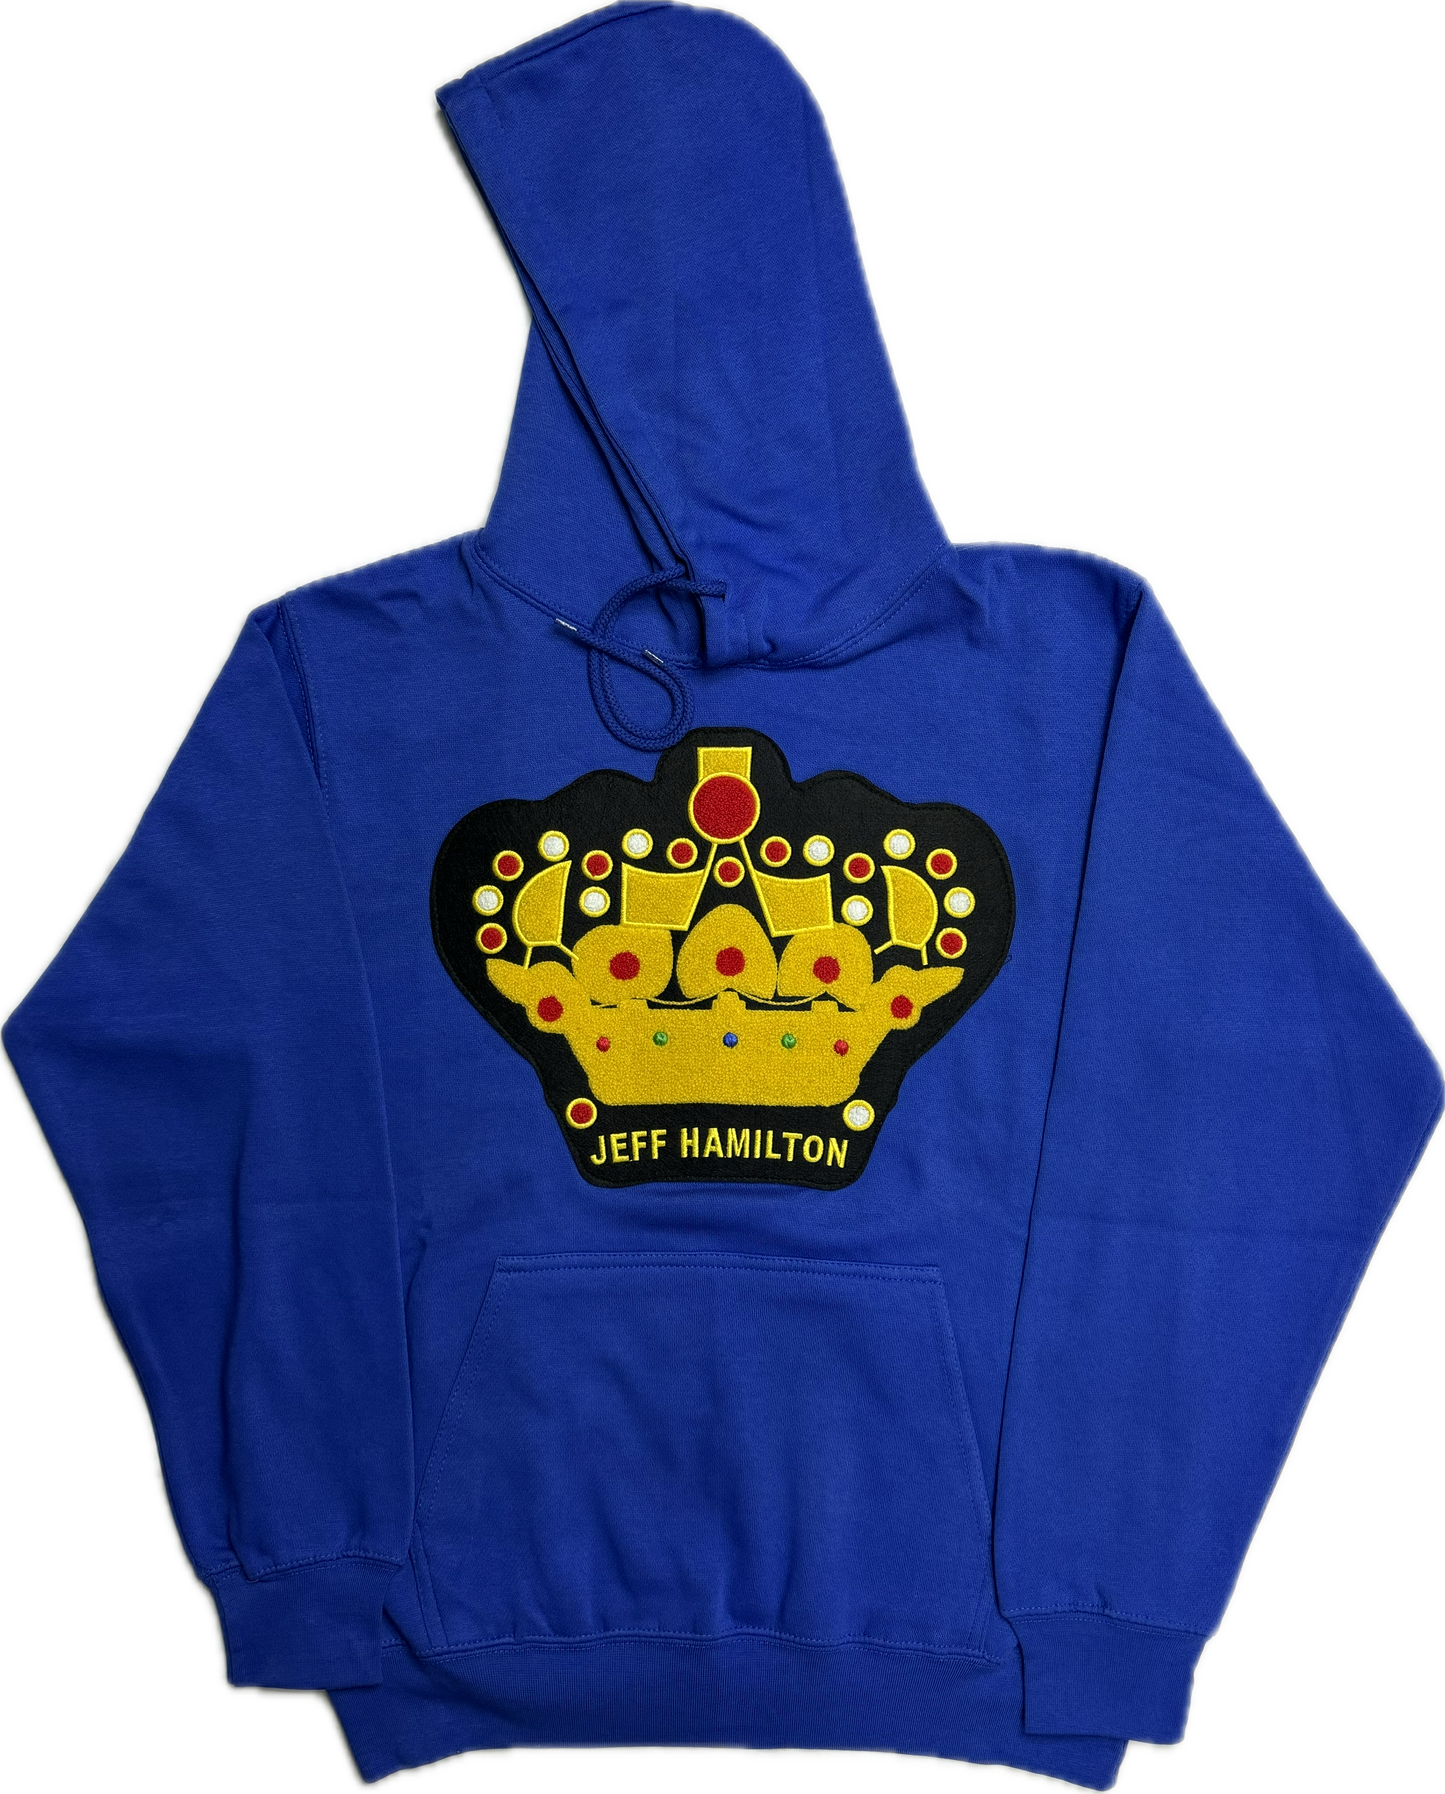 JEFF HAMITLON BLACK AND YELLOW CROWN PATCH BLUE HOODIE